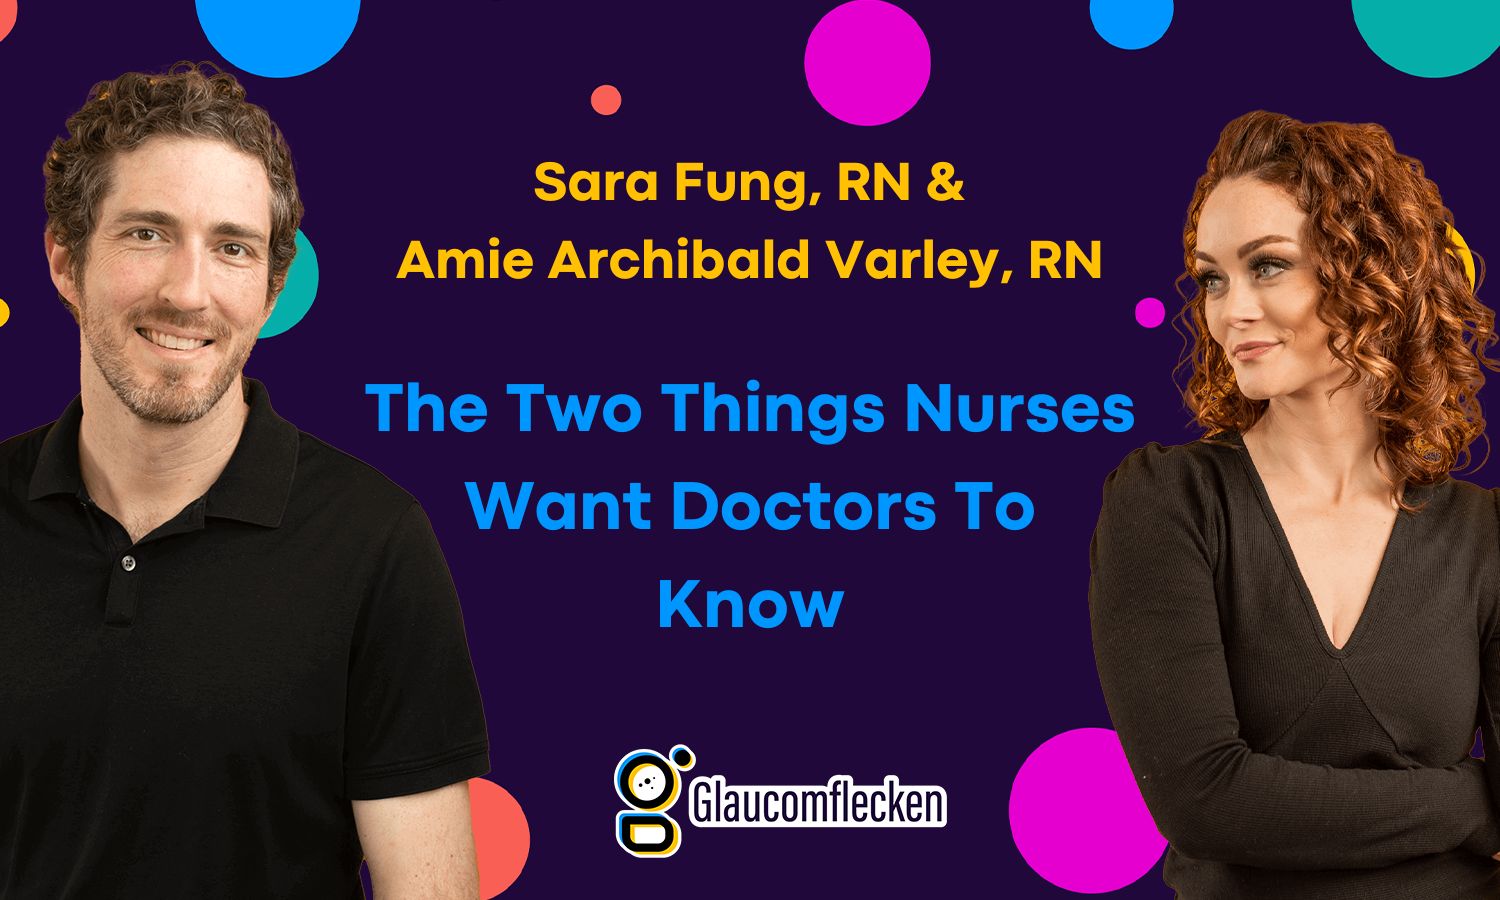 The Two Things Nurses Want Doctors To Know(2)